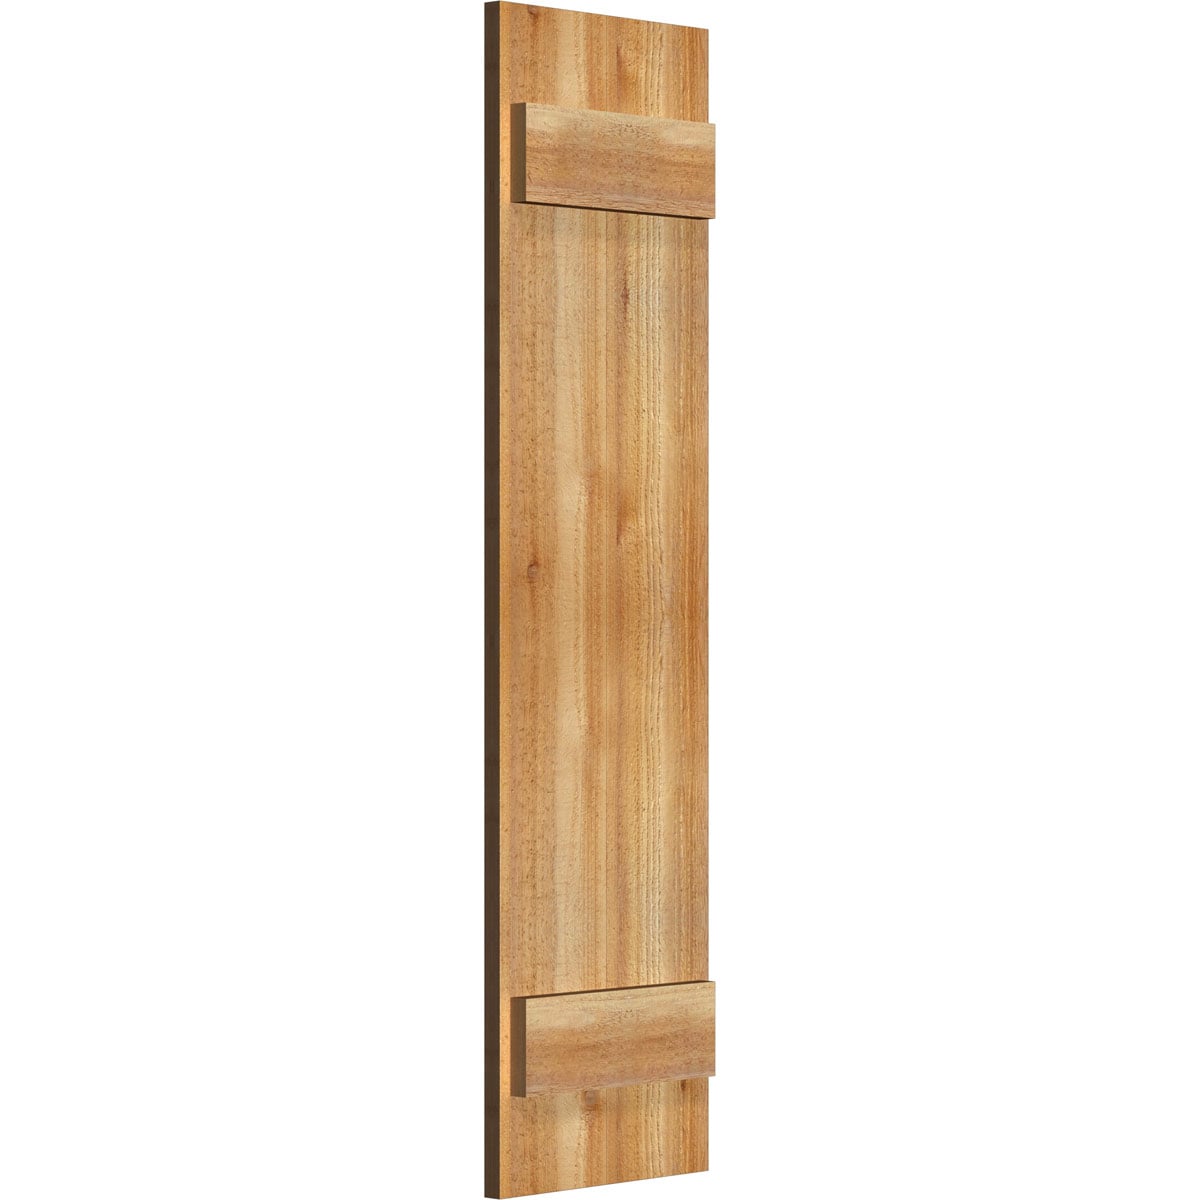 Ekena Millwork 2-Pack 10.75-in W x 41-in H Unfinished Board and Batten Wood Western Red cedar Exterior Shutters